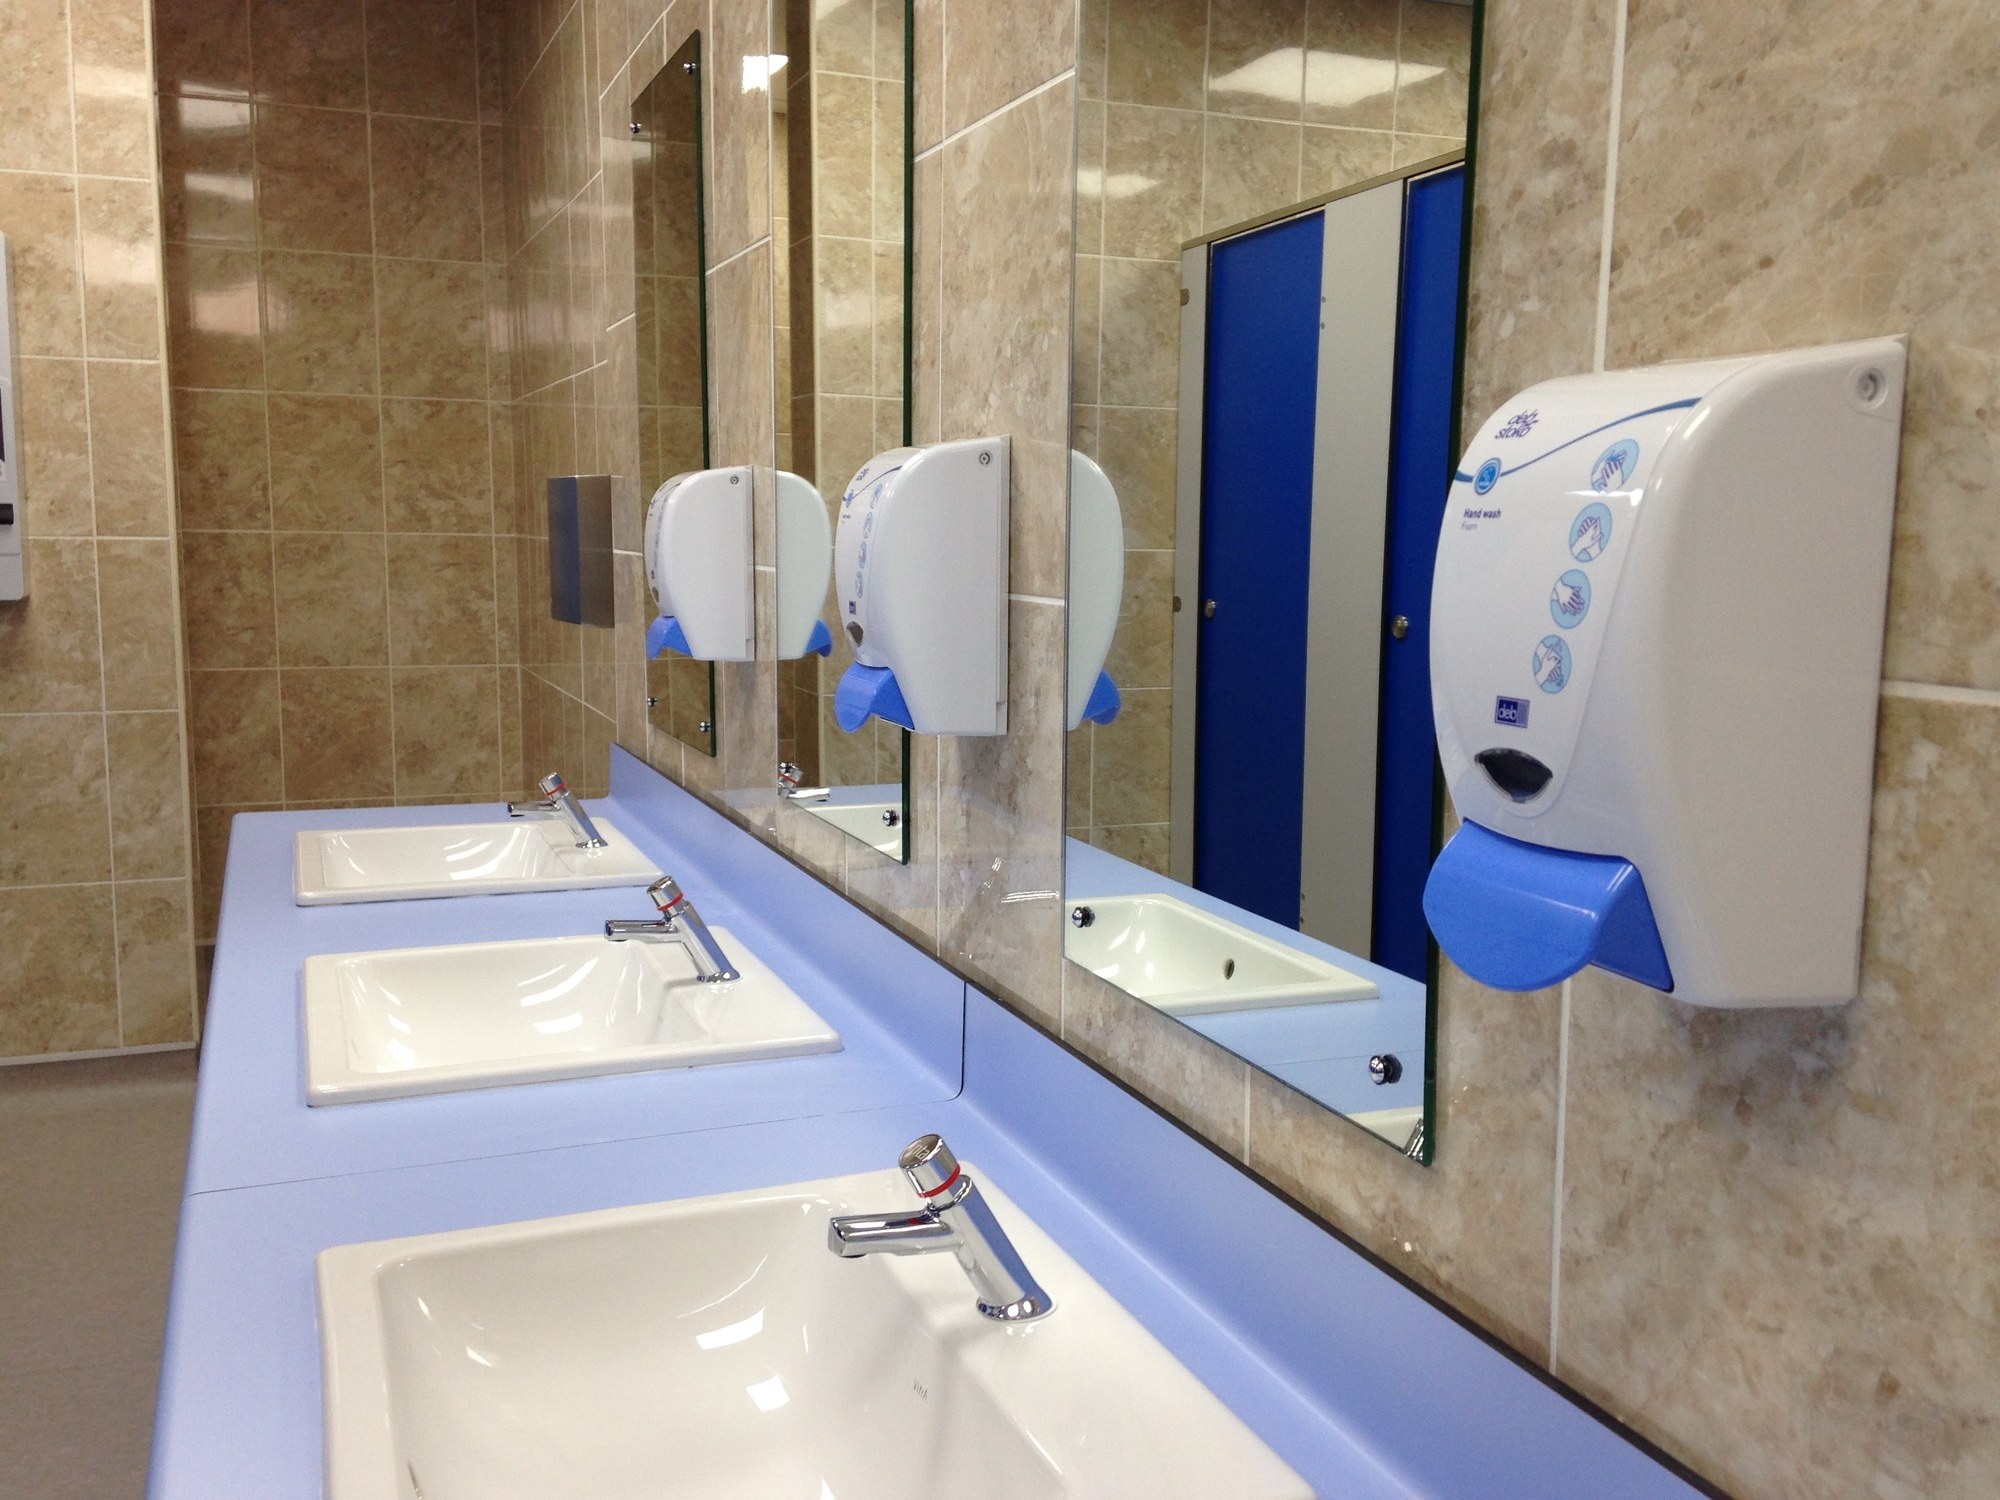 New sinks and soap dispensers in Bournemouth and Poole College.